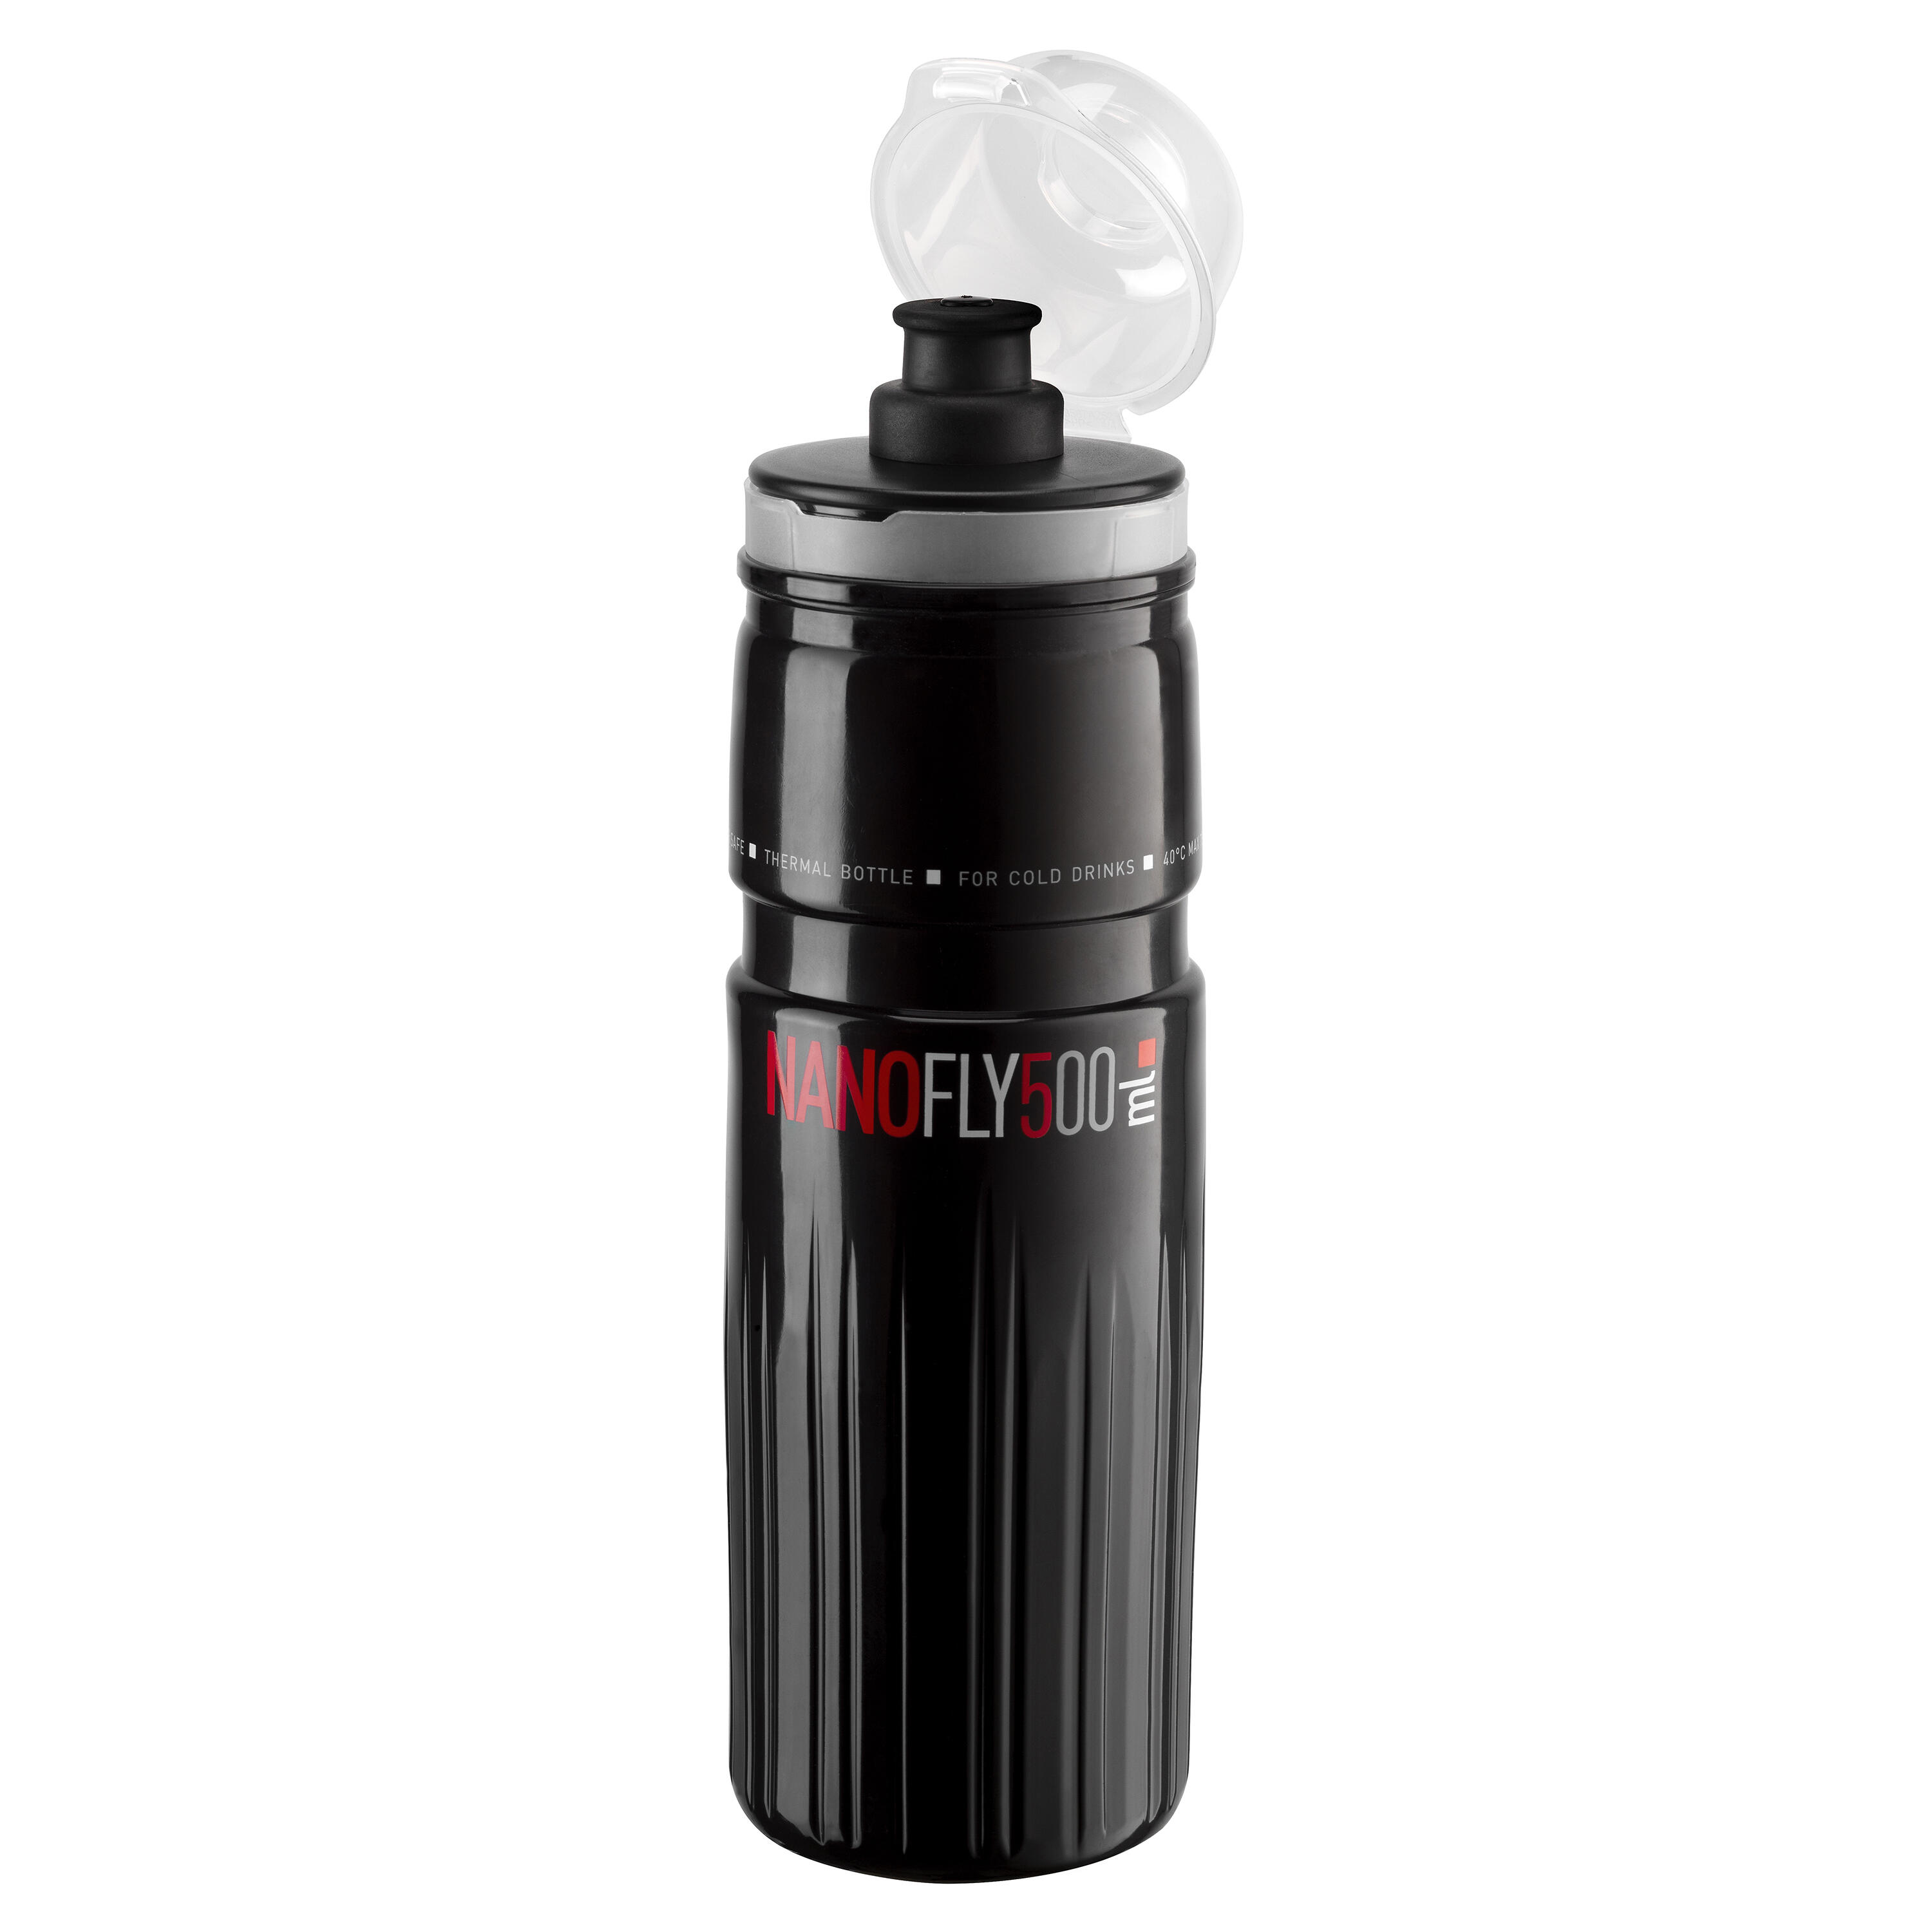 Nano Fly Thermal Cycling Water Bottle, Black - 500ml 1/4